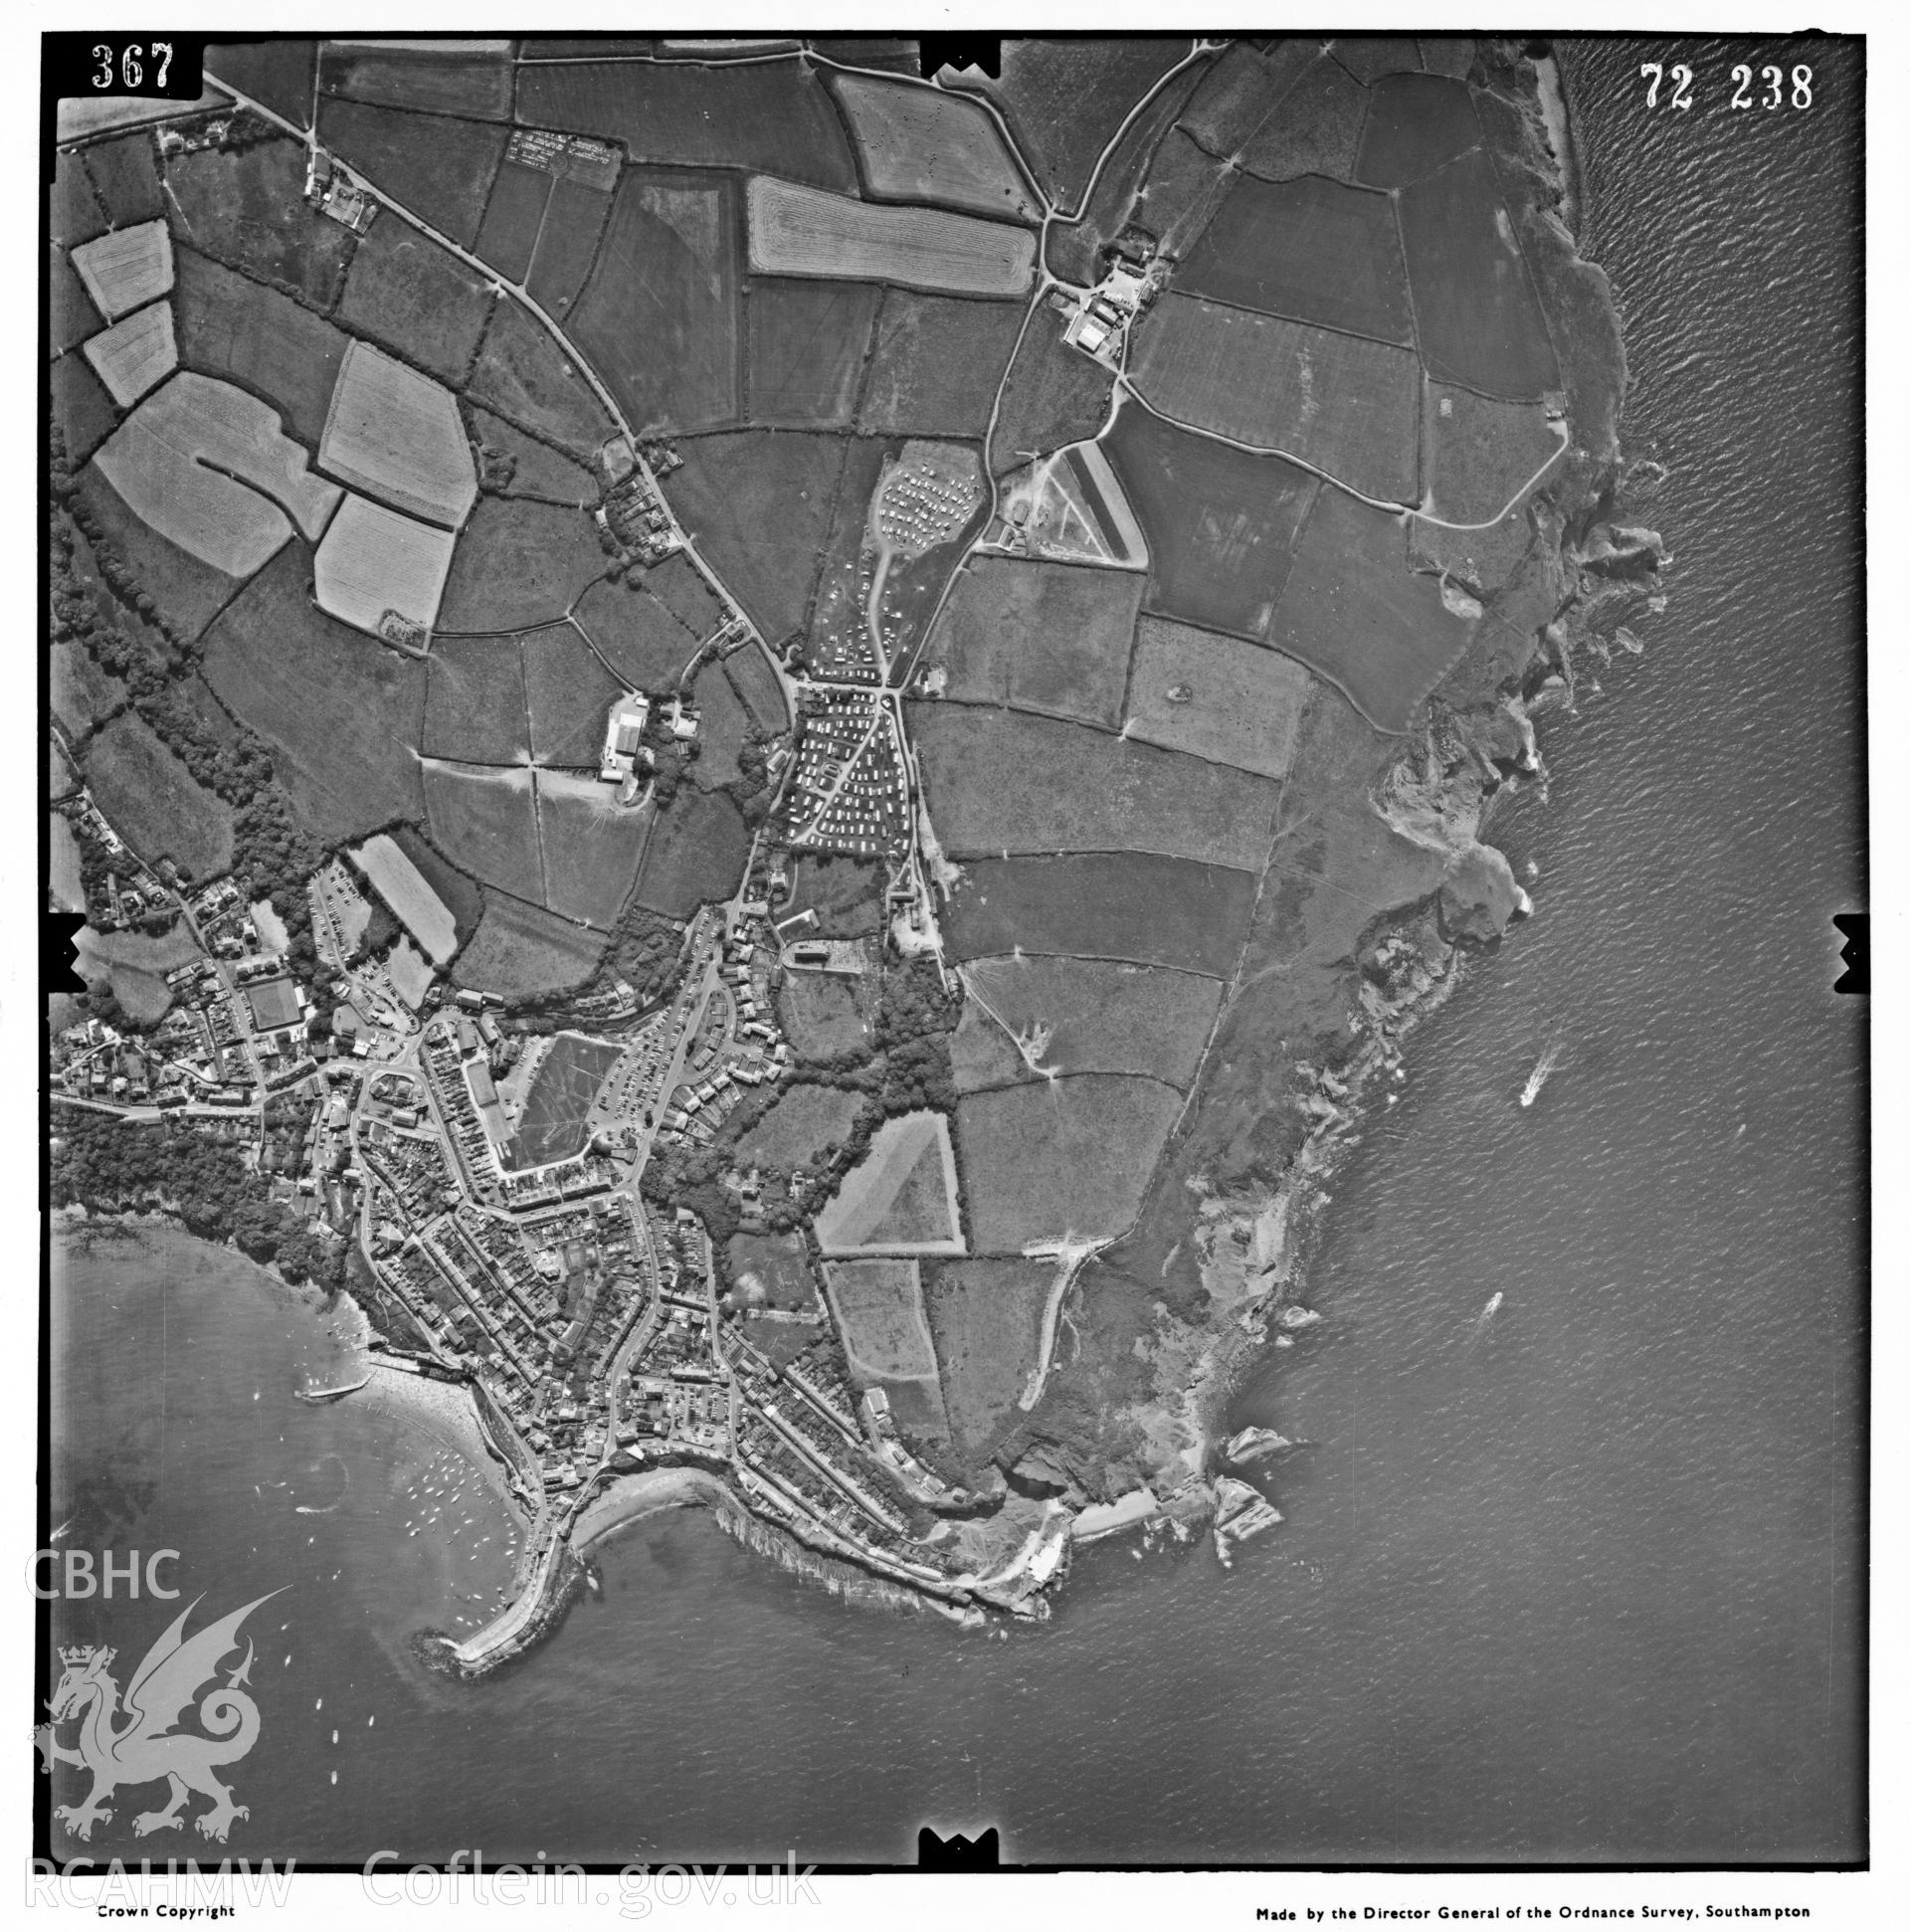 Digitized copy of an aerial photograph showing New Quay area, taken by Ordnance Survey, 1972.